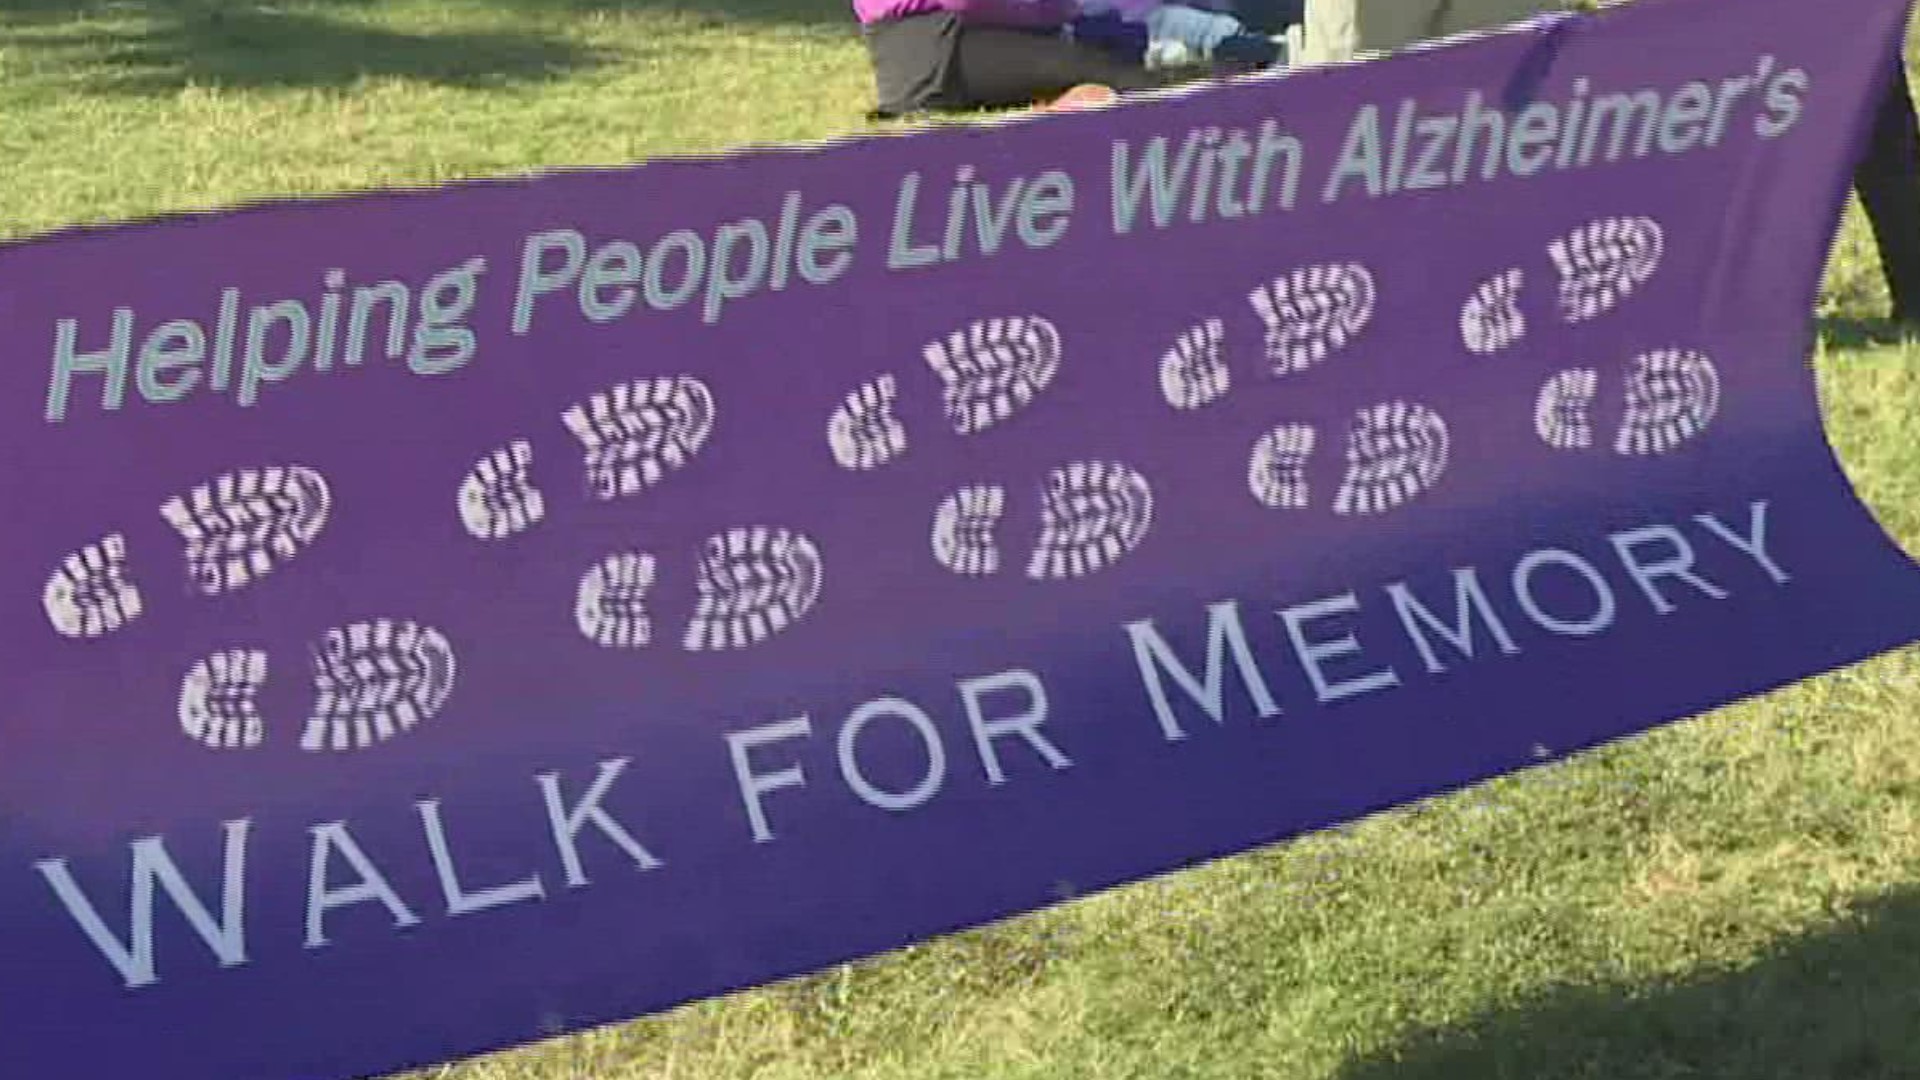 Face to Face welcomes all participants to come Walk for Memory, raise awareness, raise funds & enjoy the beautiful view of our lovely Corpus Christi Coast.